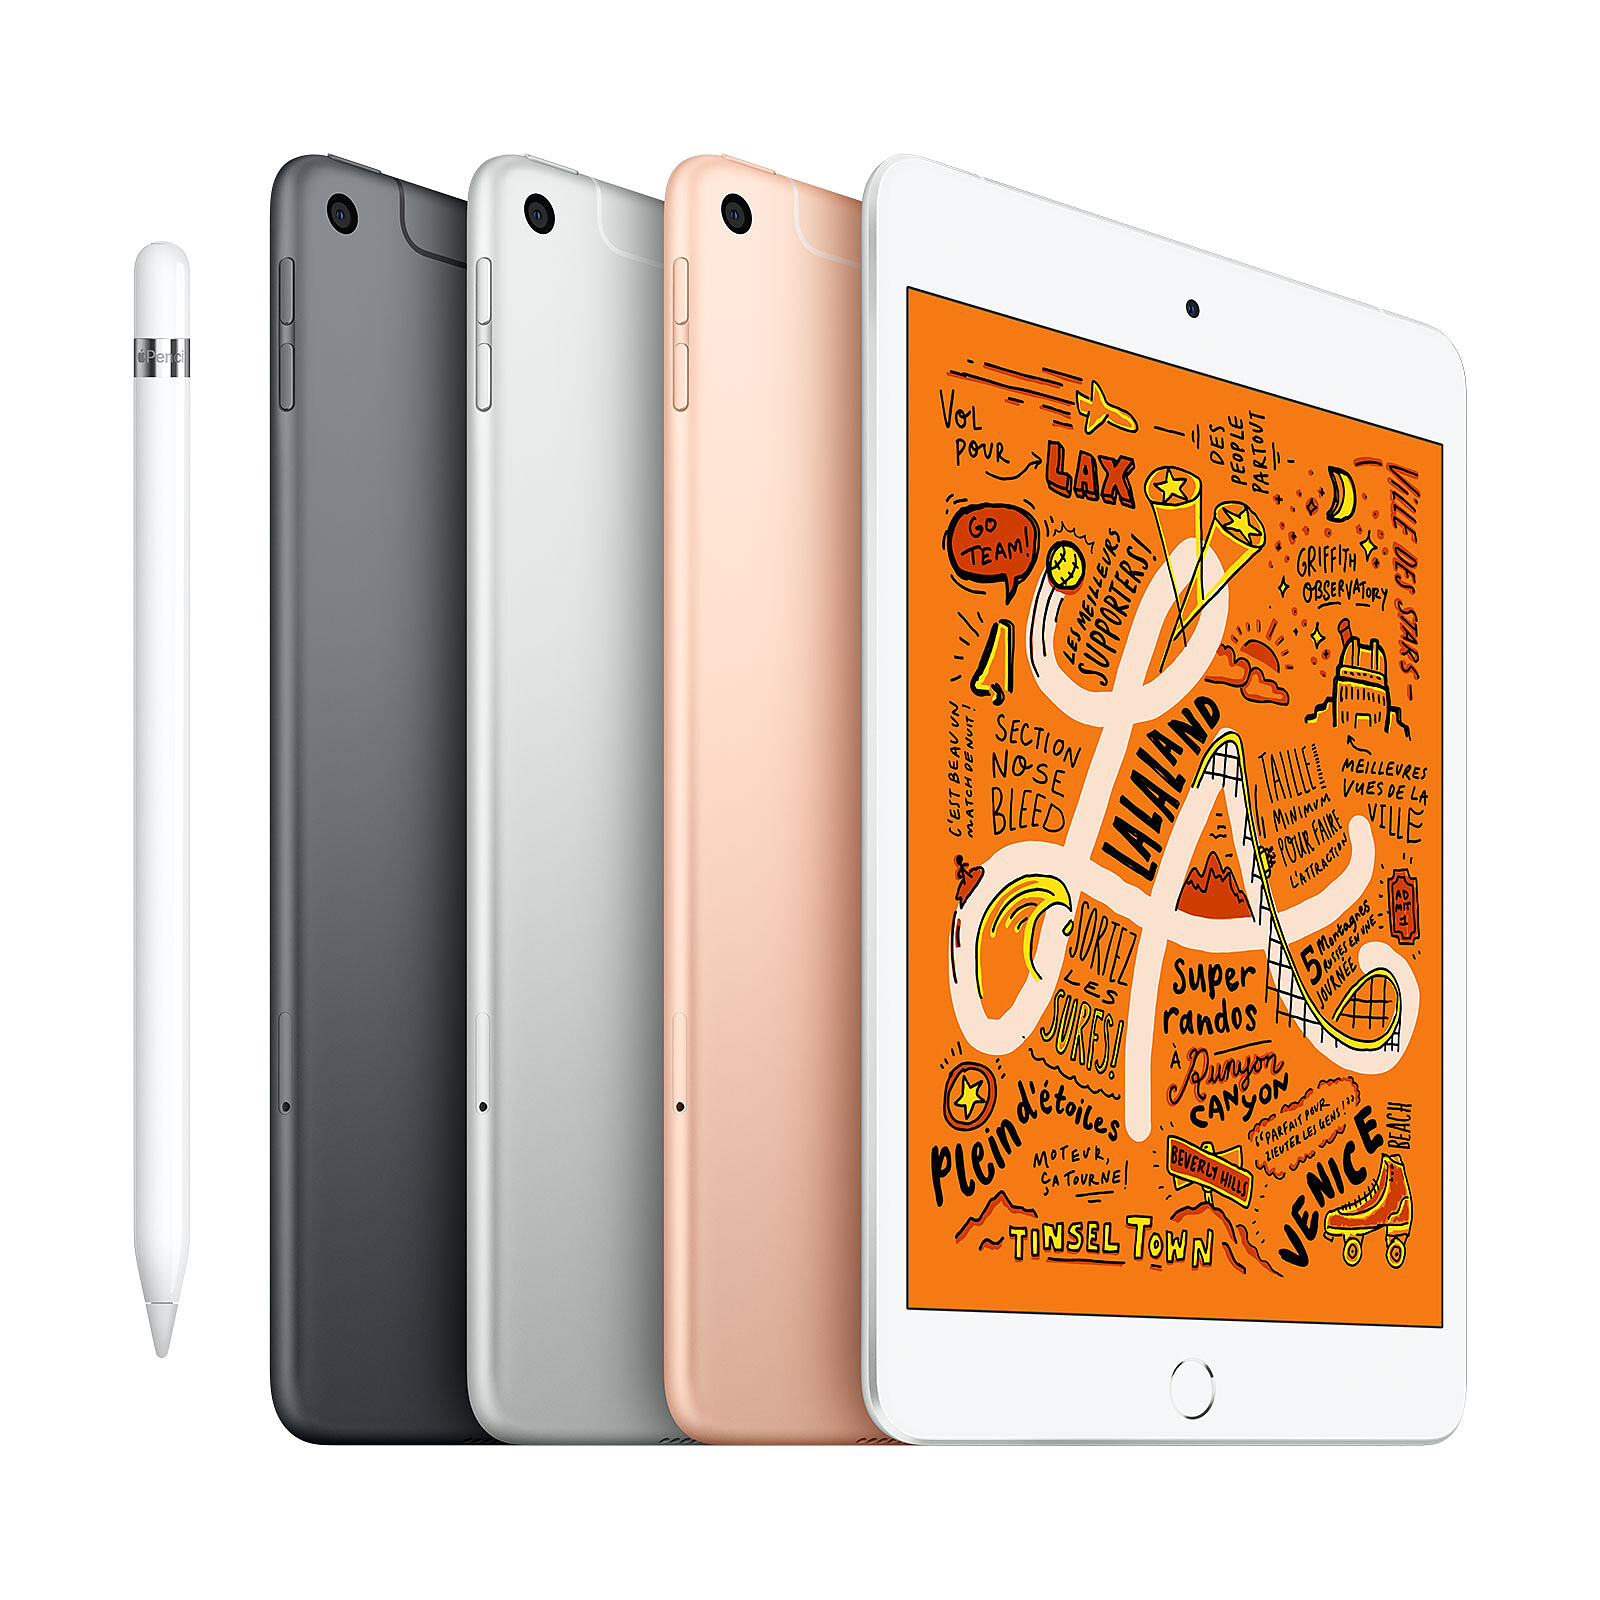 PC/タブレット タブレット Apple iPad mini 5 Wi-Fi Cellular 256 GB Gold - Tablet computer 